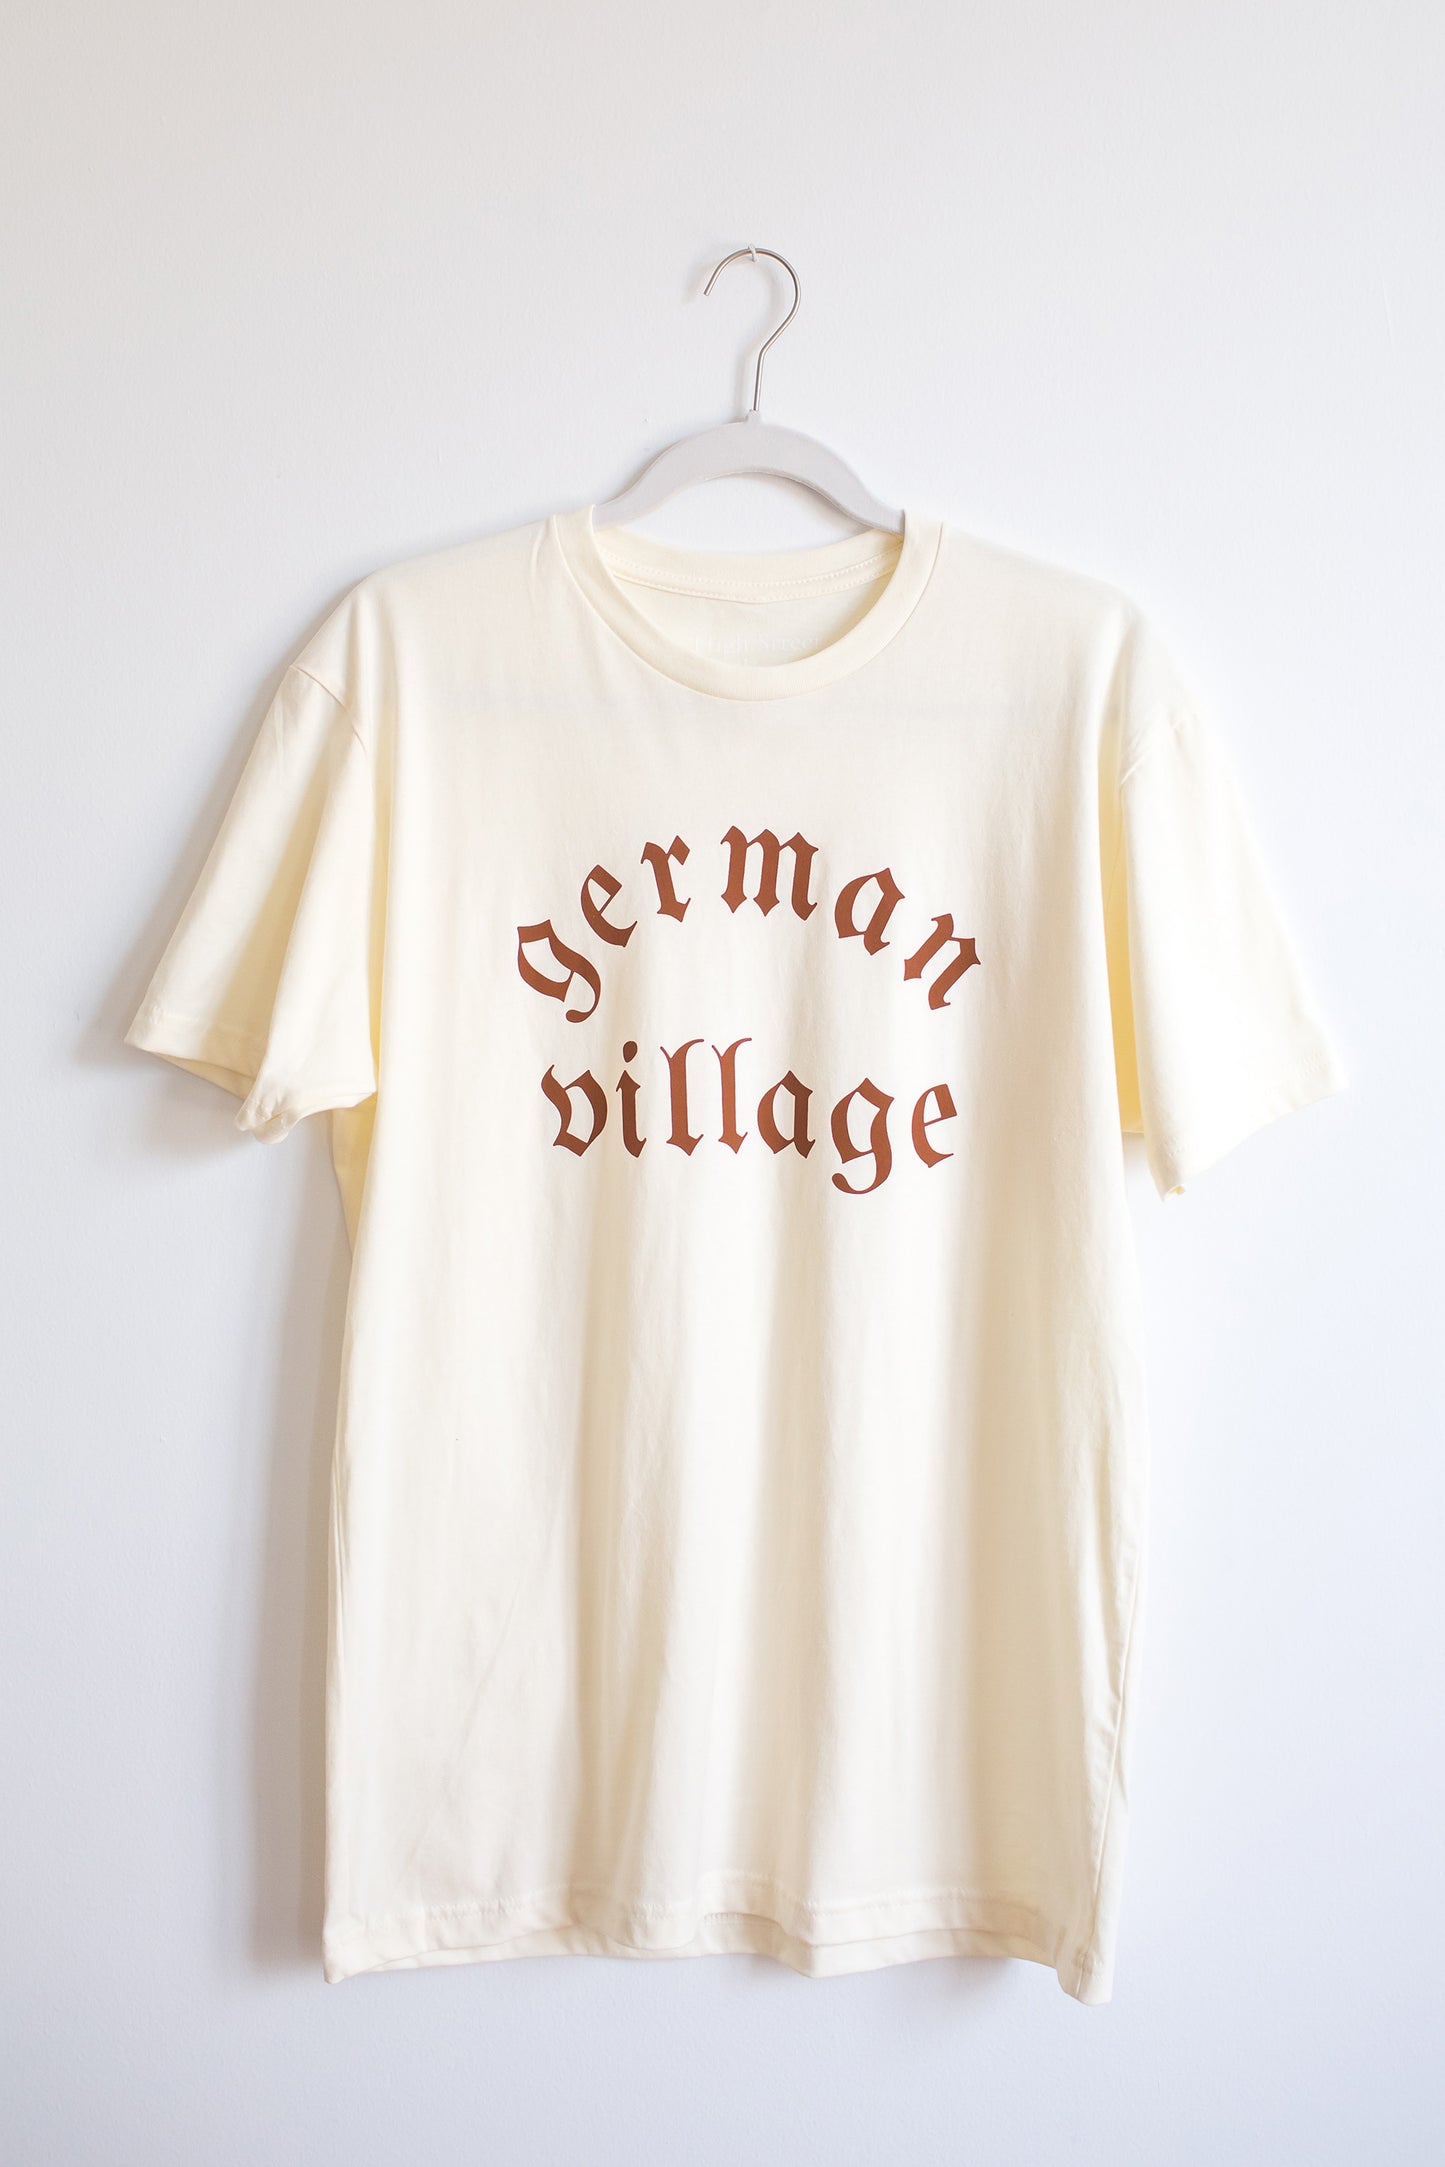 Hanging cream colored cotton crewneck tee with German Village graphic at front